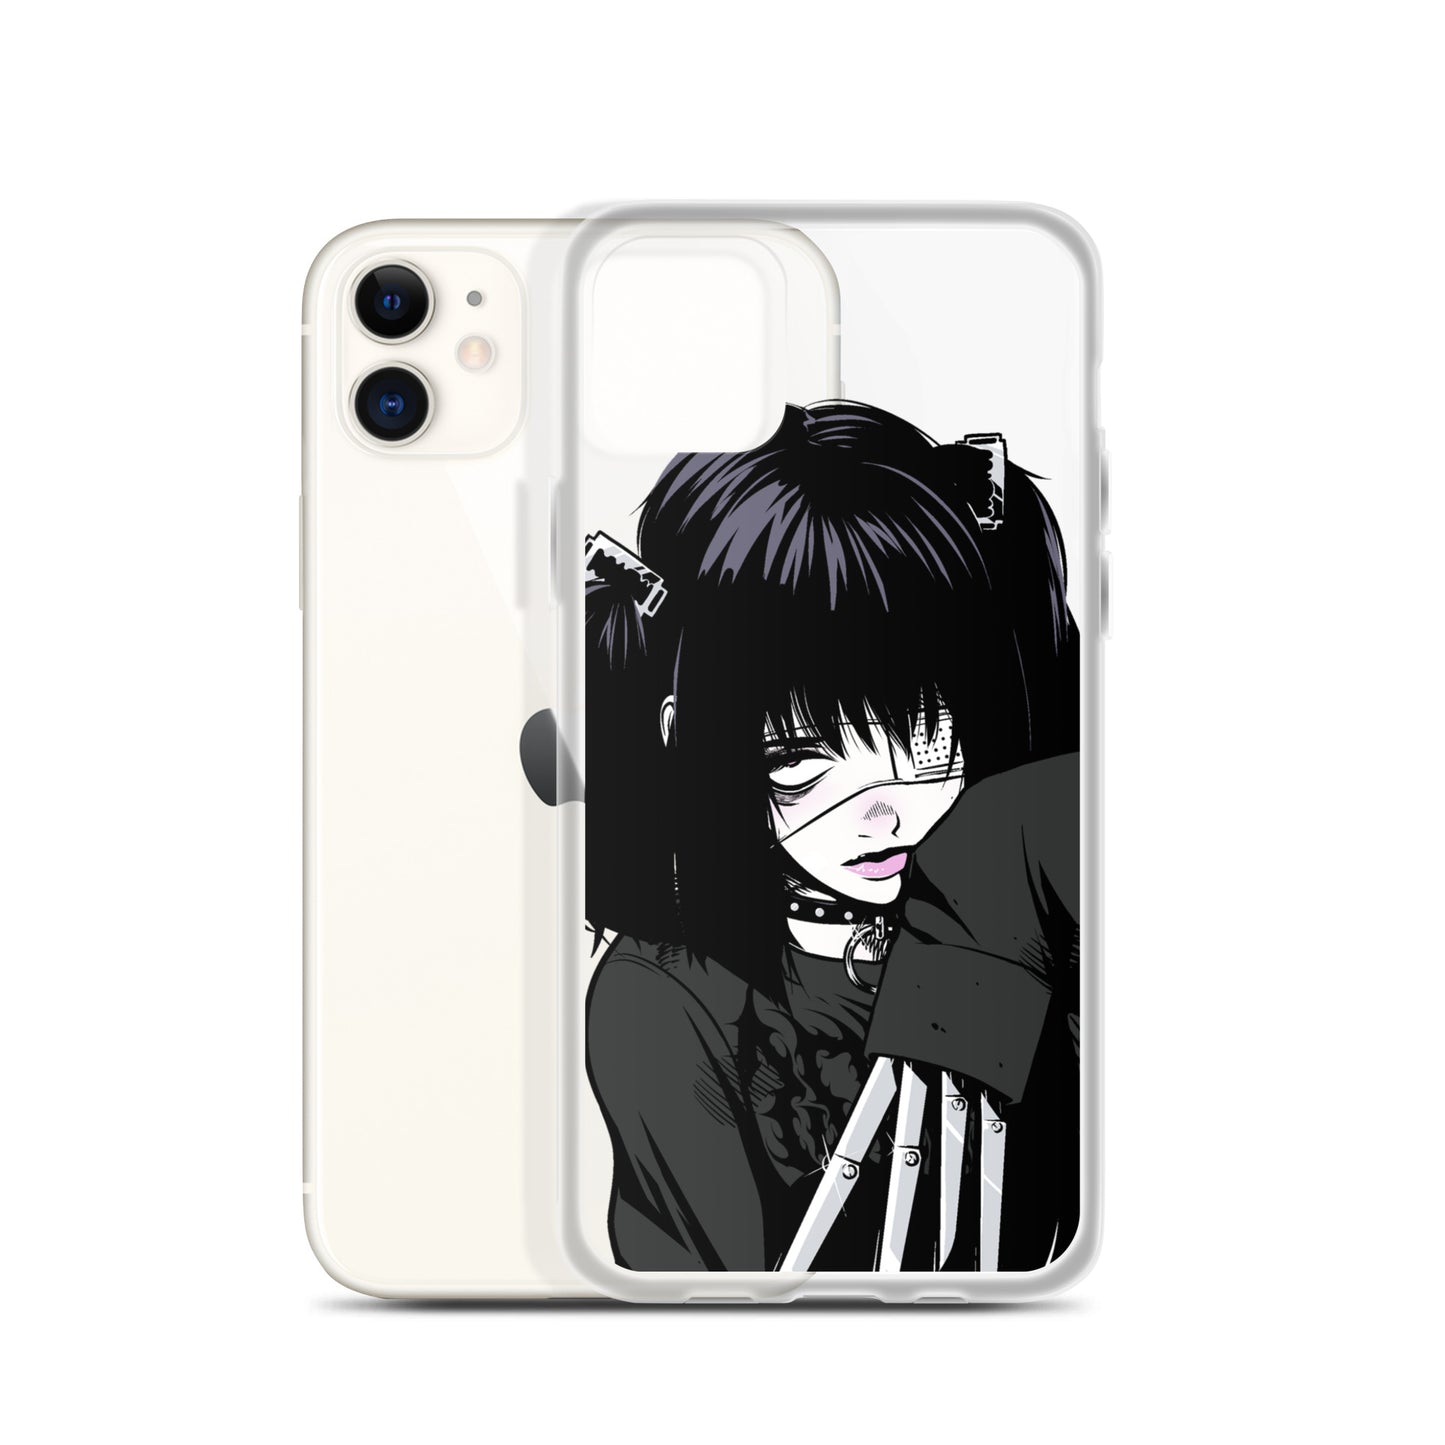 after hours iphone case